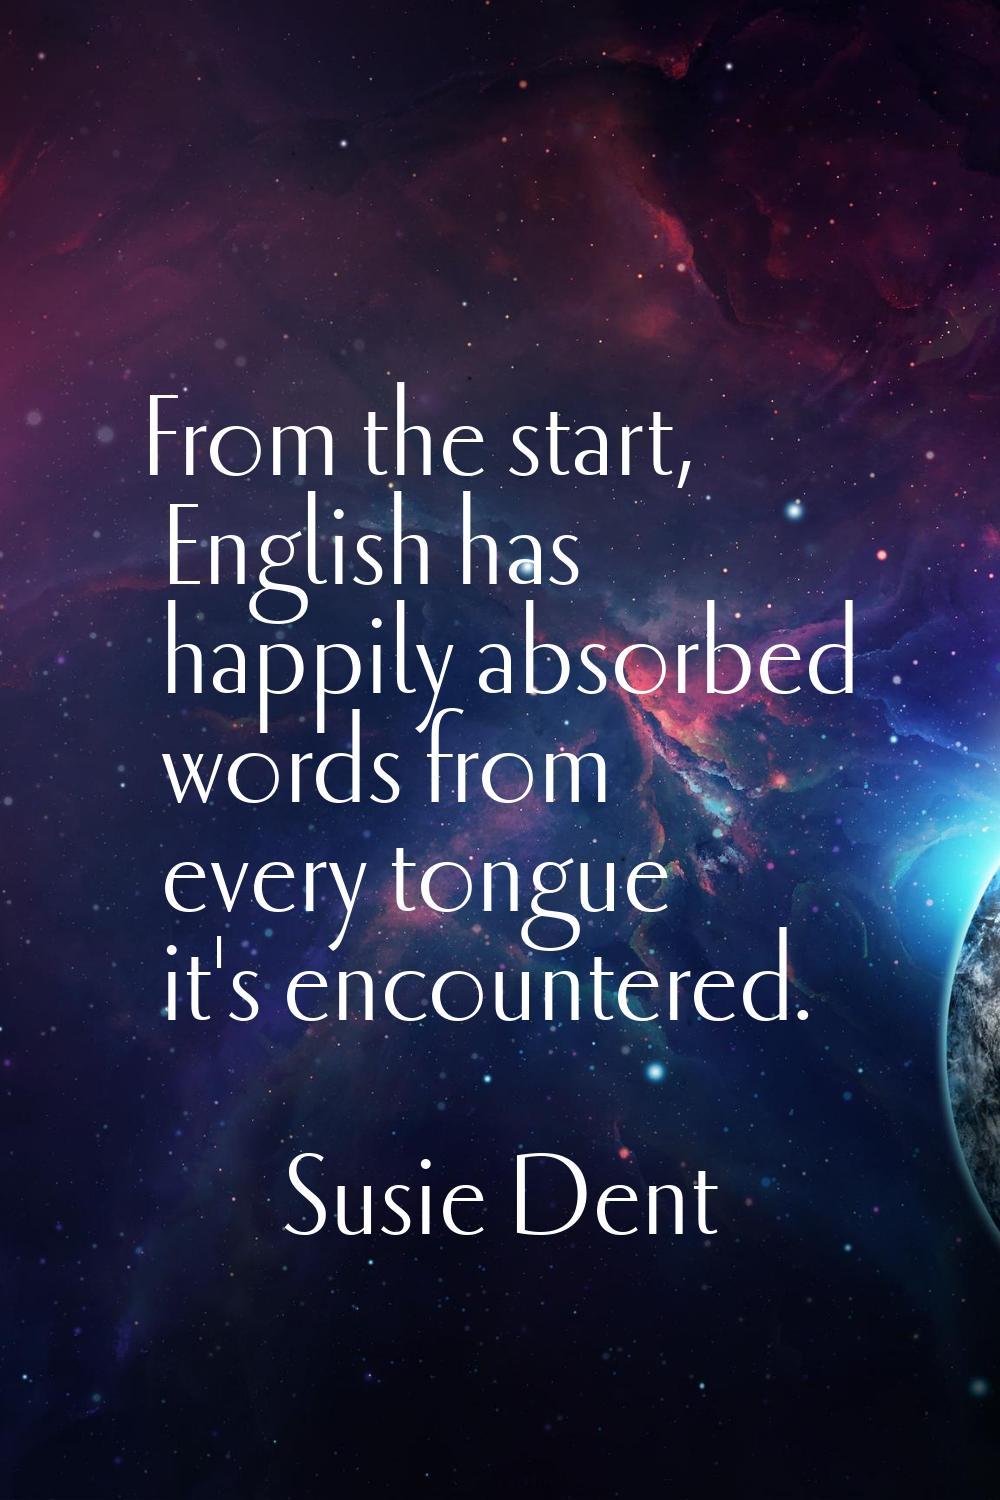 From the start, English has happily absorbed words from every tongue it's encountered.